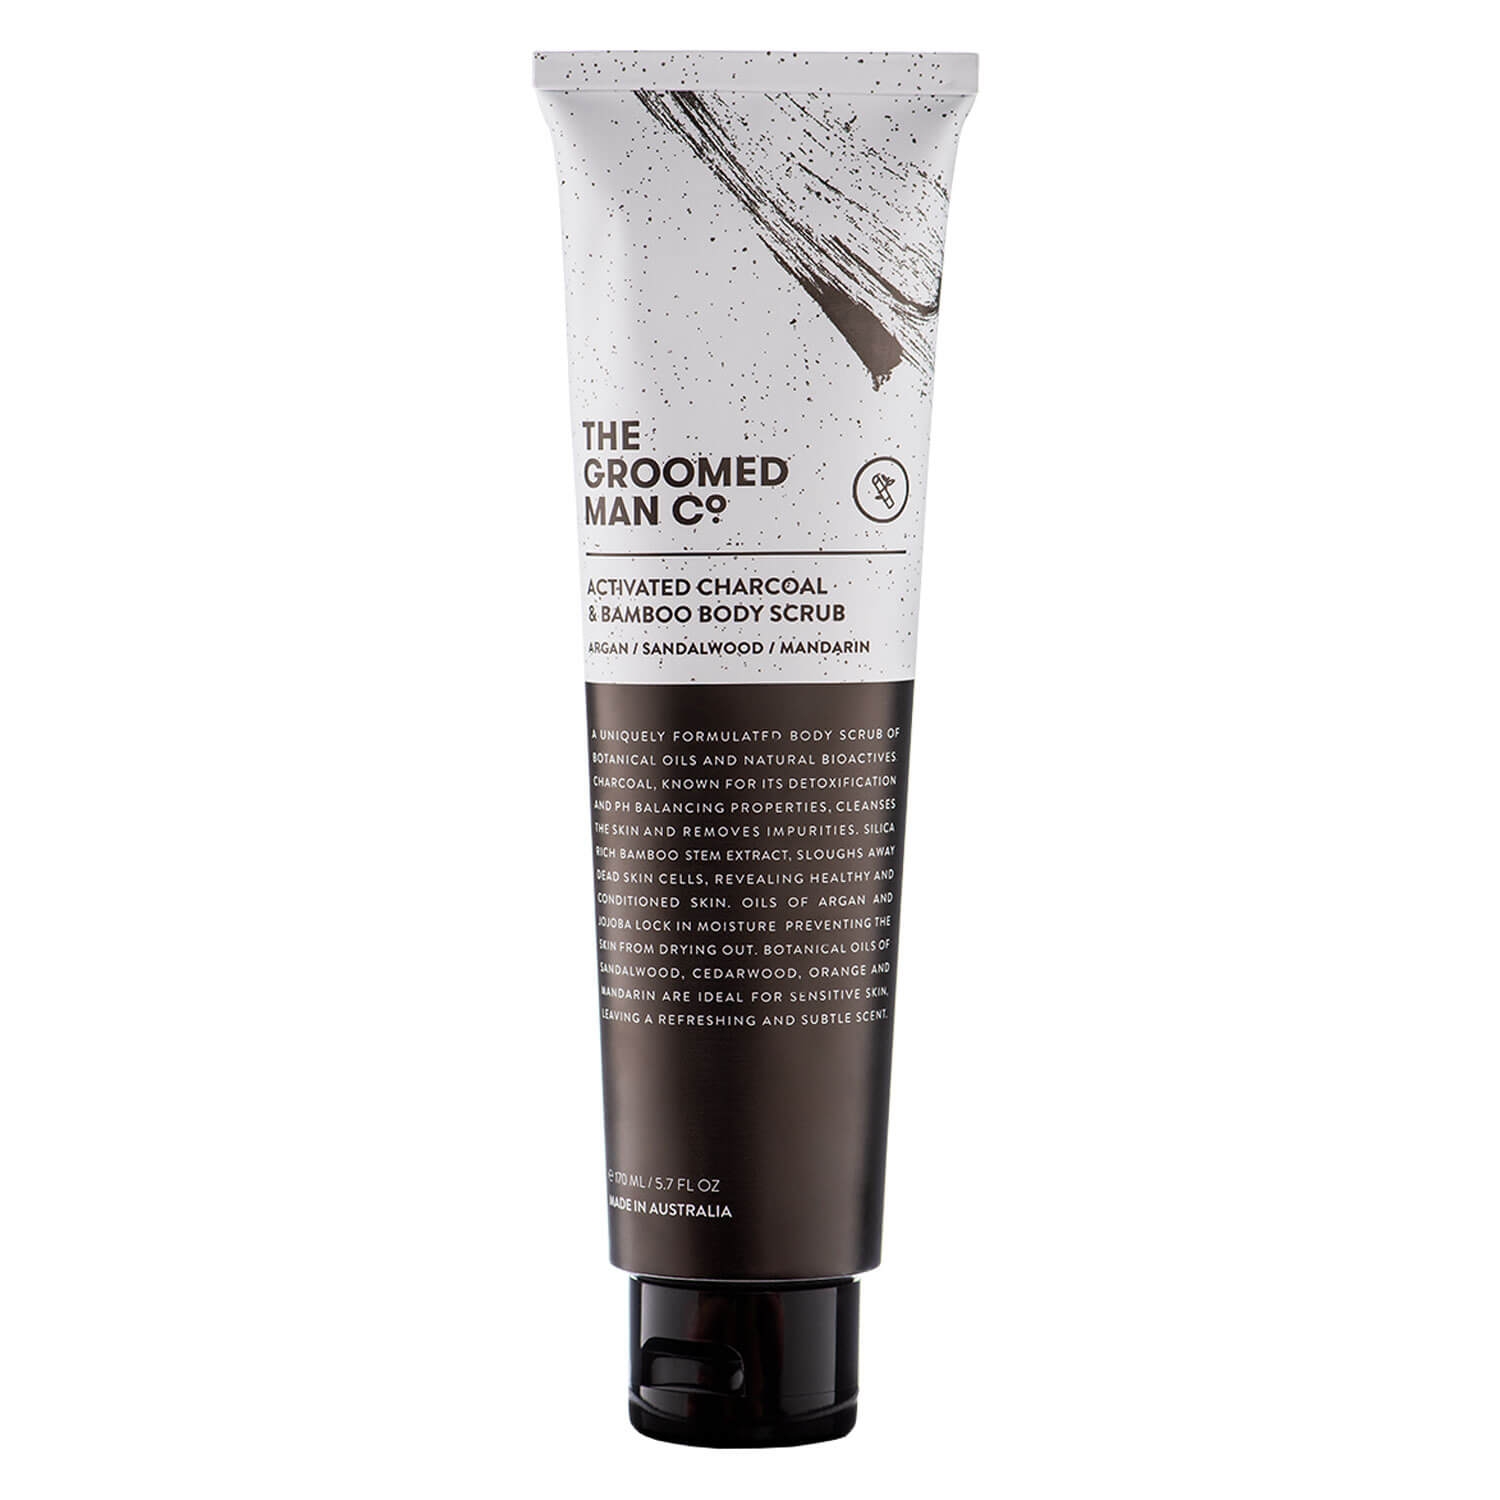 Produktbild von THE GROOMED MAN CO. - Activated Charcoal Body Scrub